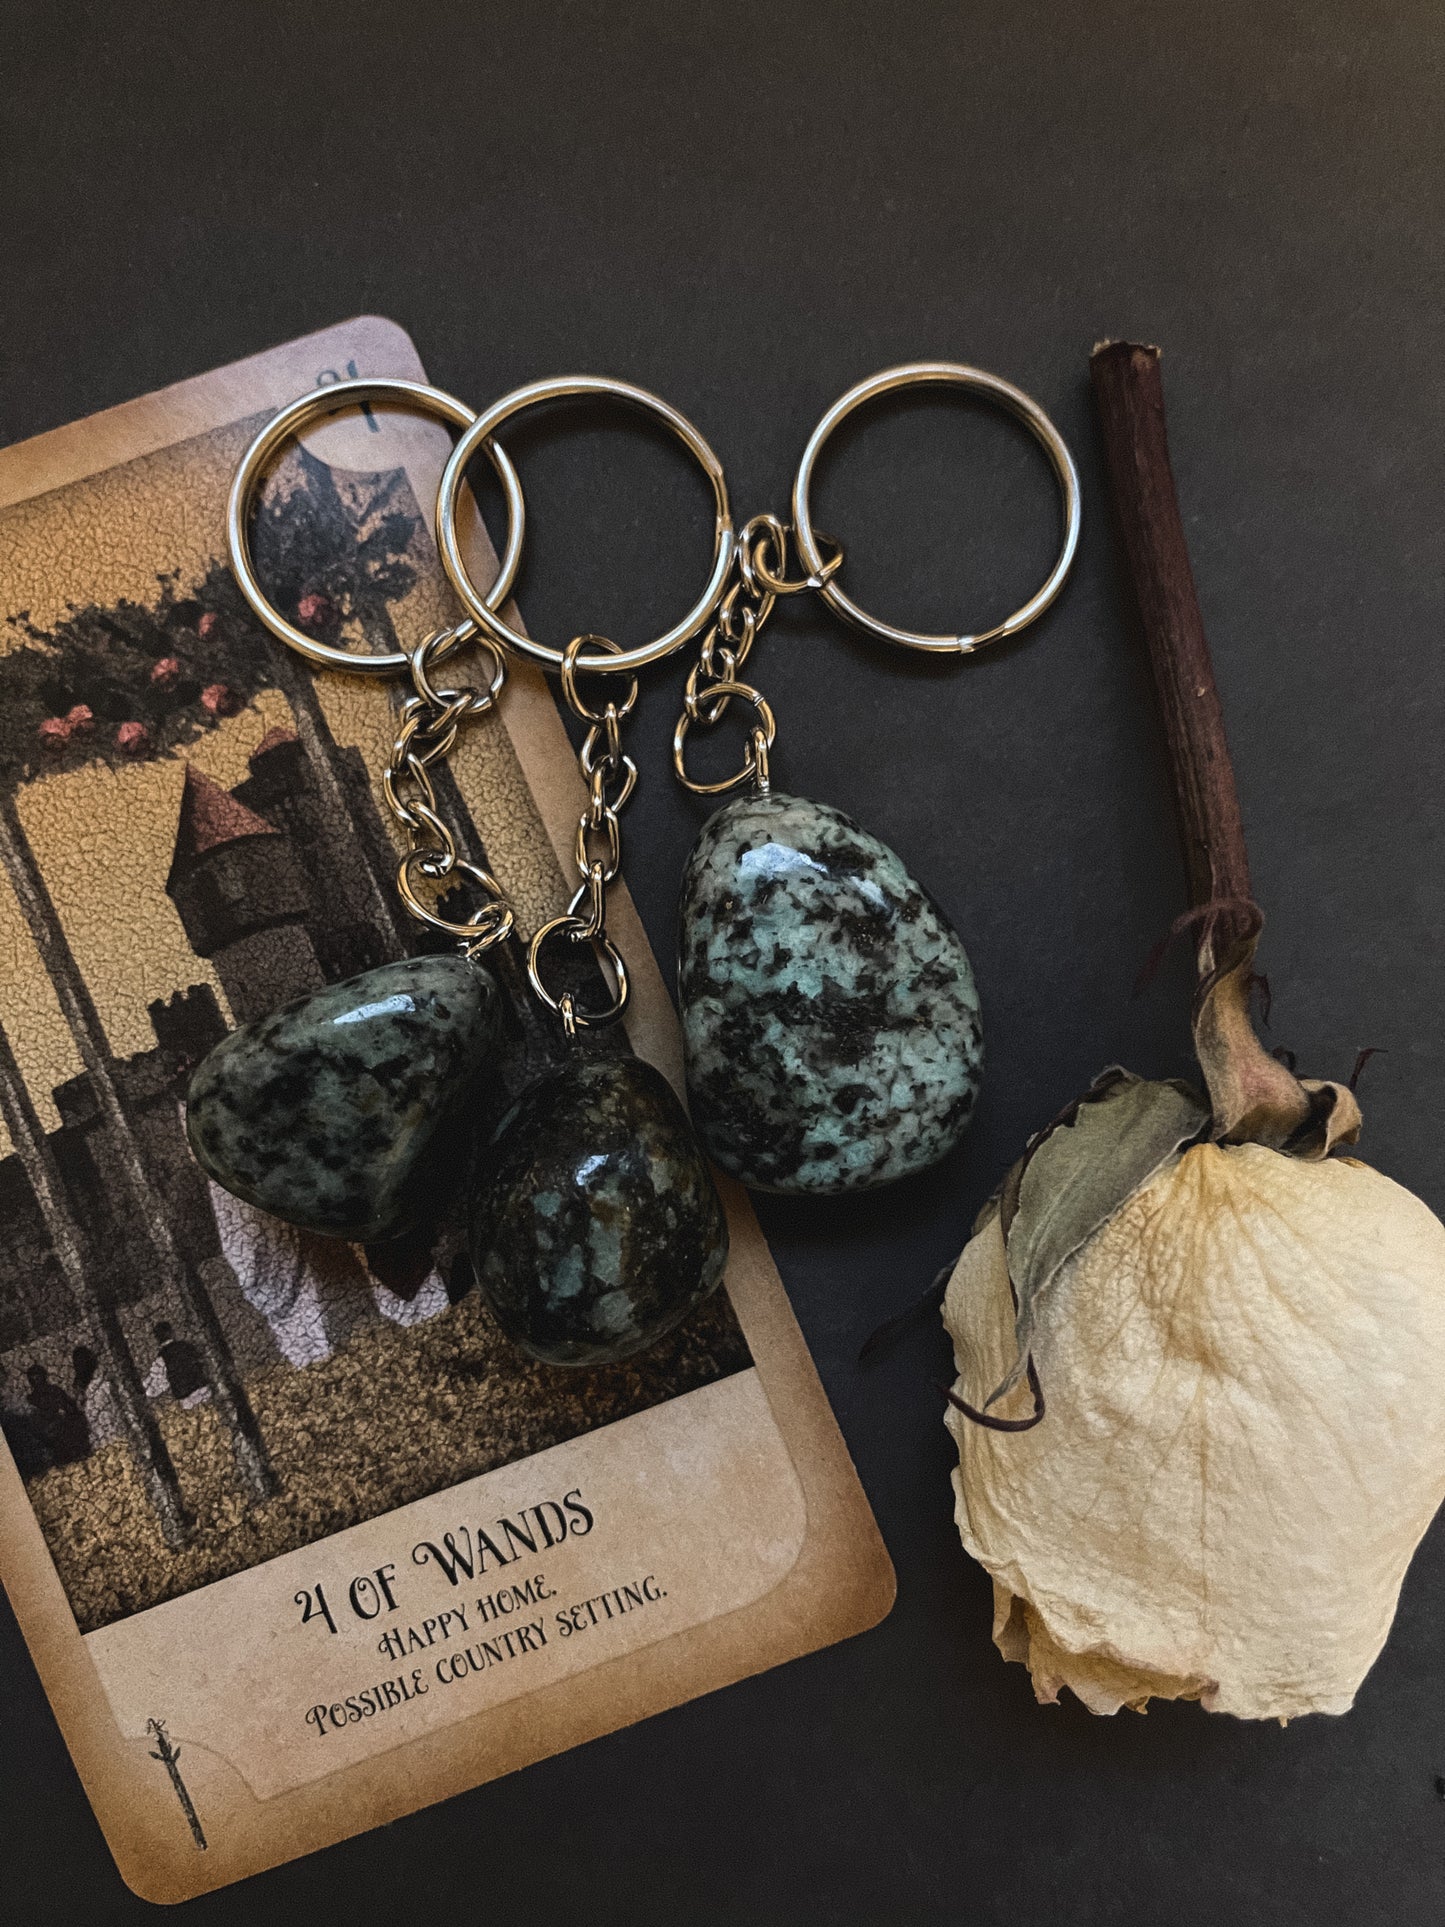 African Turquoise Keychain